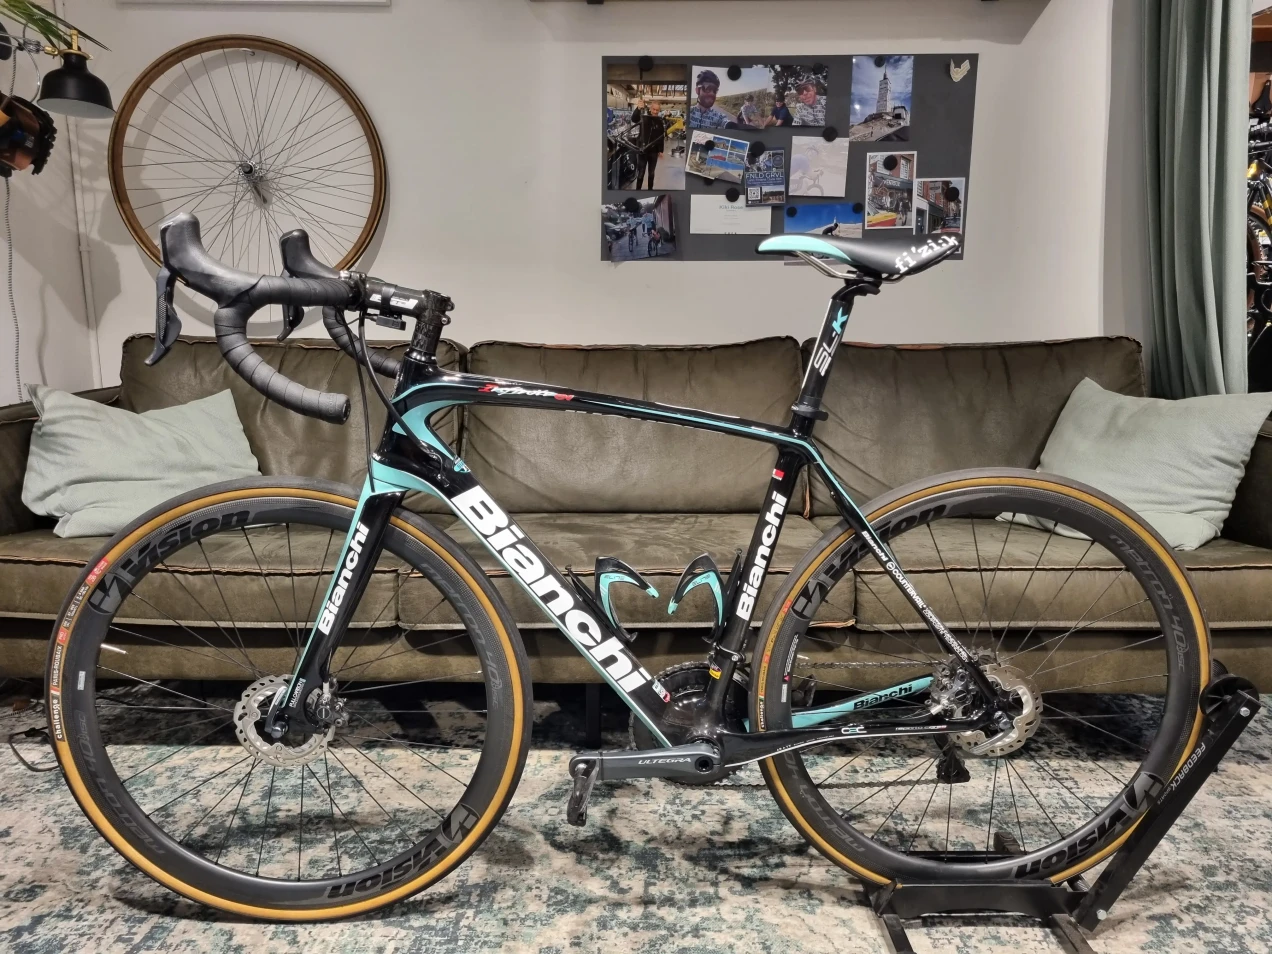 Bianchi Infinito CV Ultegra Di2 Disc Compact used in M | buycycle